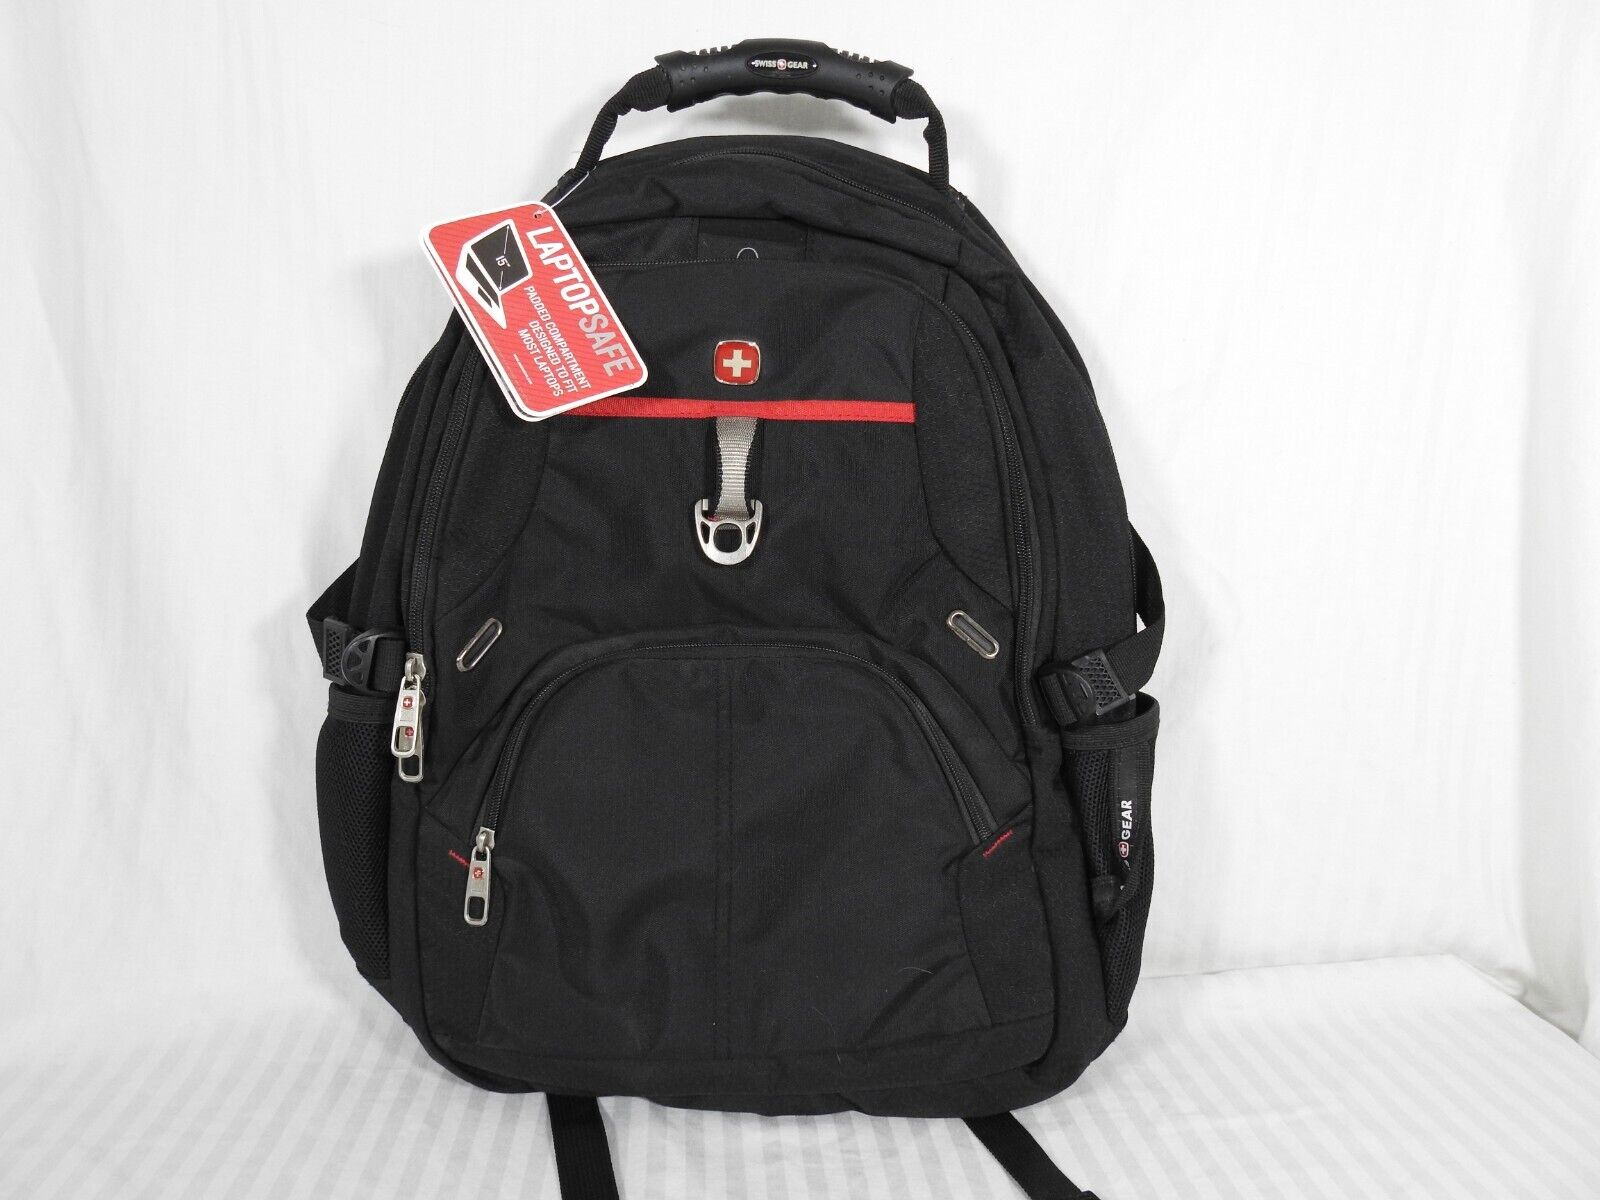 NEW W TAGS Black Swiss Gear Airflow Padded Laptop Tablet Backpack.